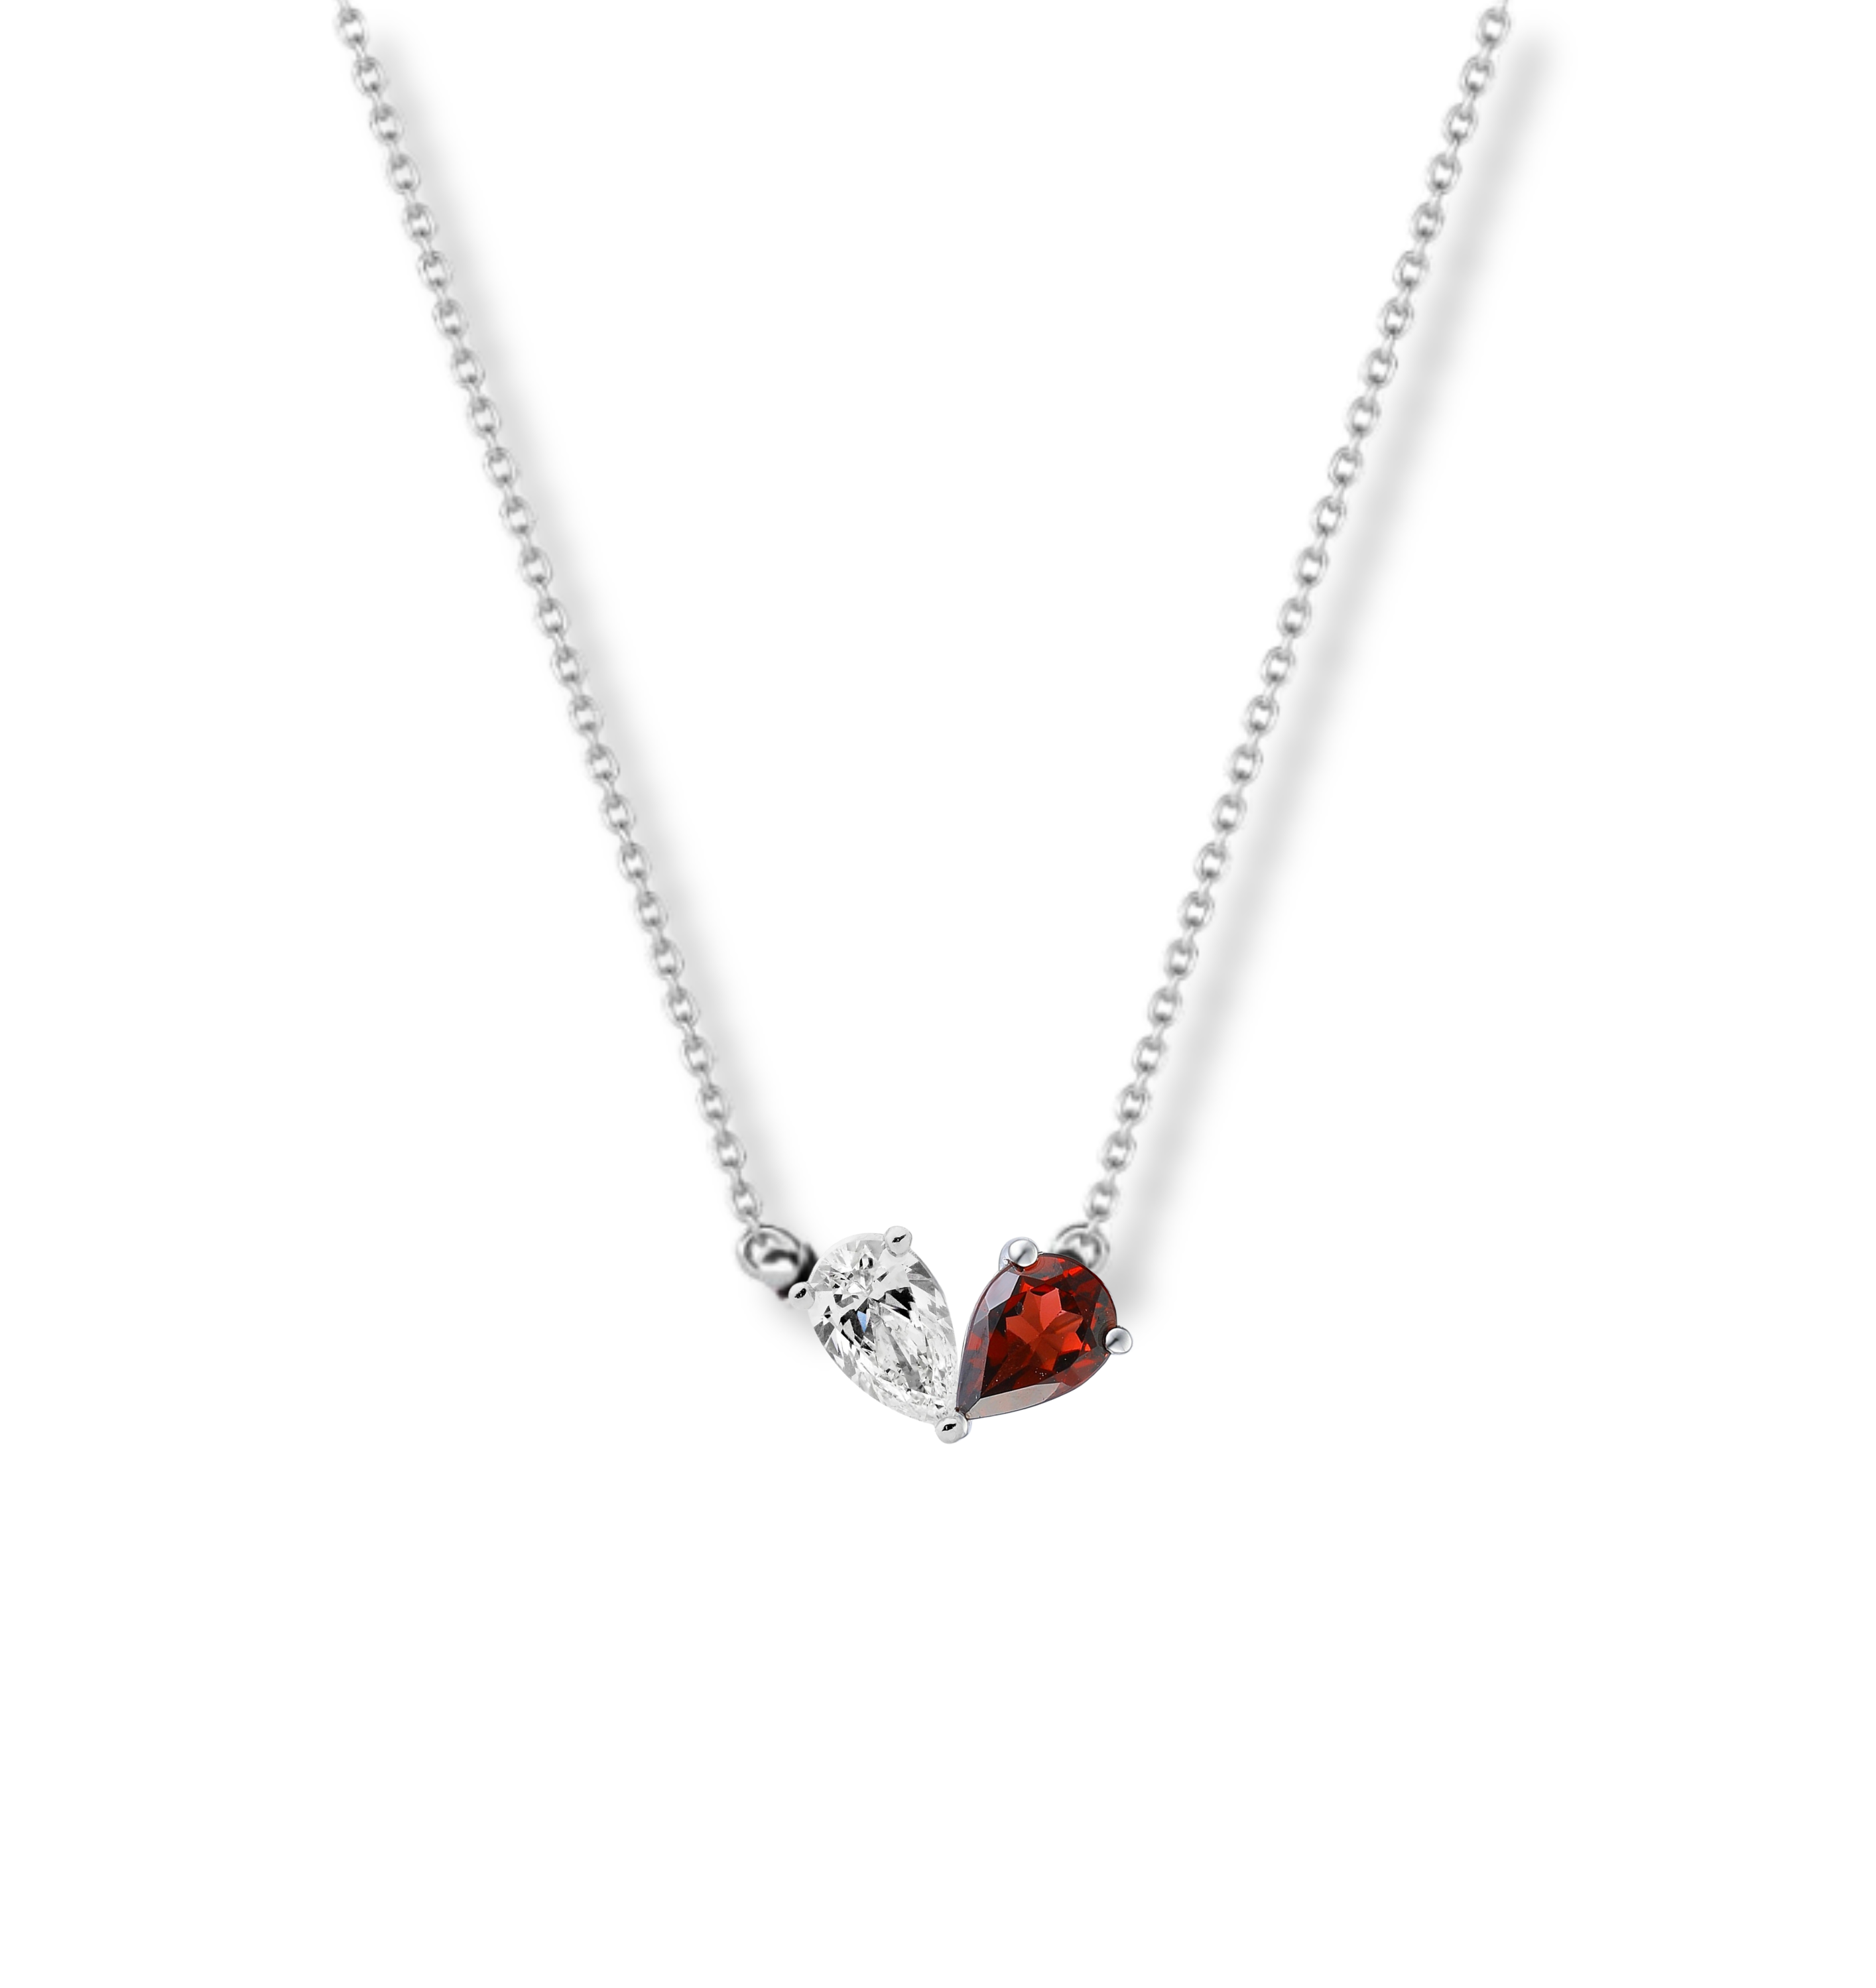 The Perfect Pair Necklace, gemstone necklace, heart necklace, silver necklace, garnet pendant, mossanite pendant, white gold pendant, rose gold pendant, yellow gold pendant, pear shape diamond, danielle camera jewellery, valentines day gift